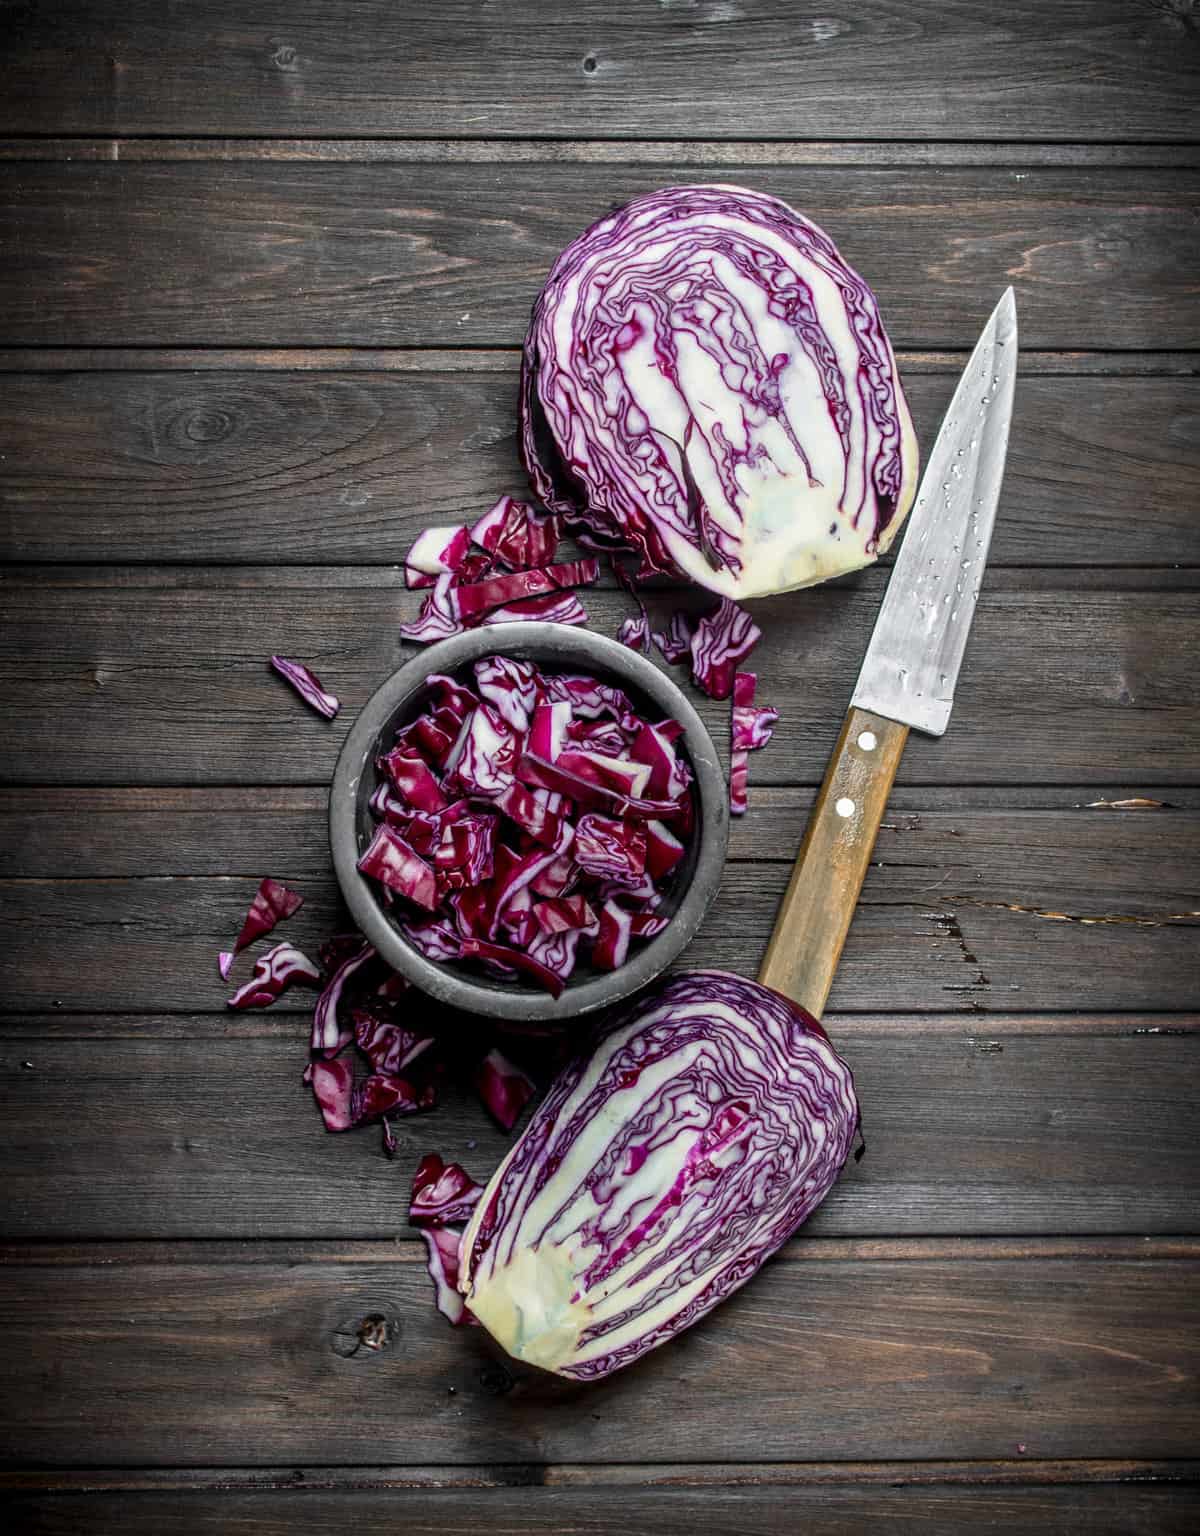 Roasted red cabbage in a bowl on a wooden table.